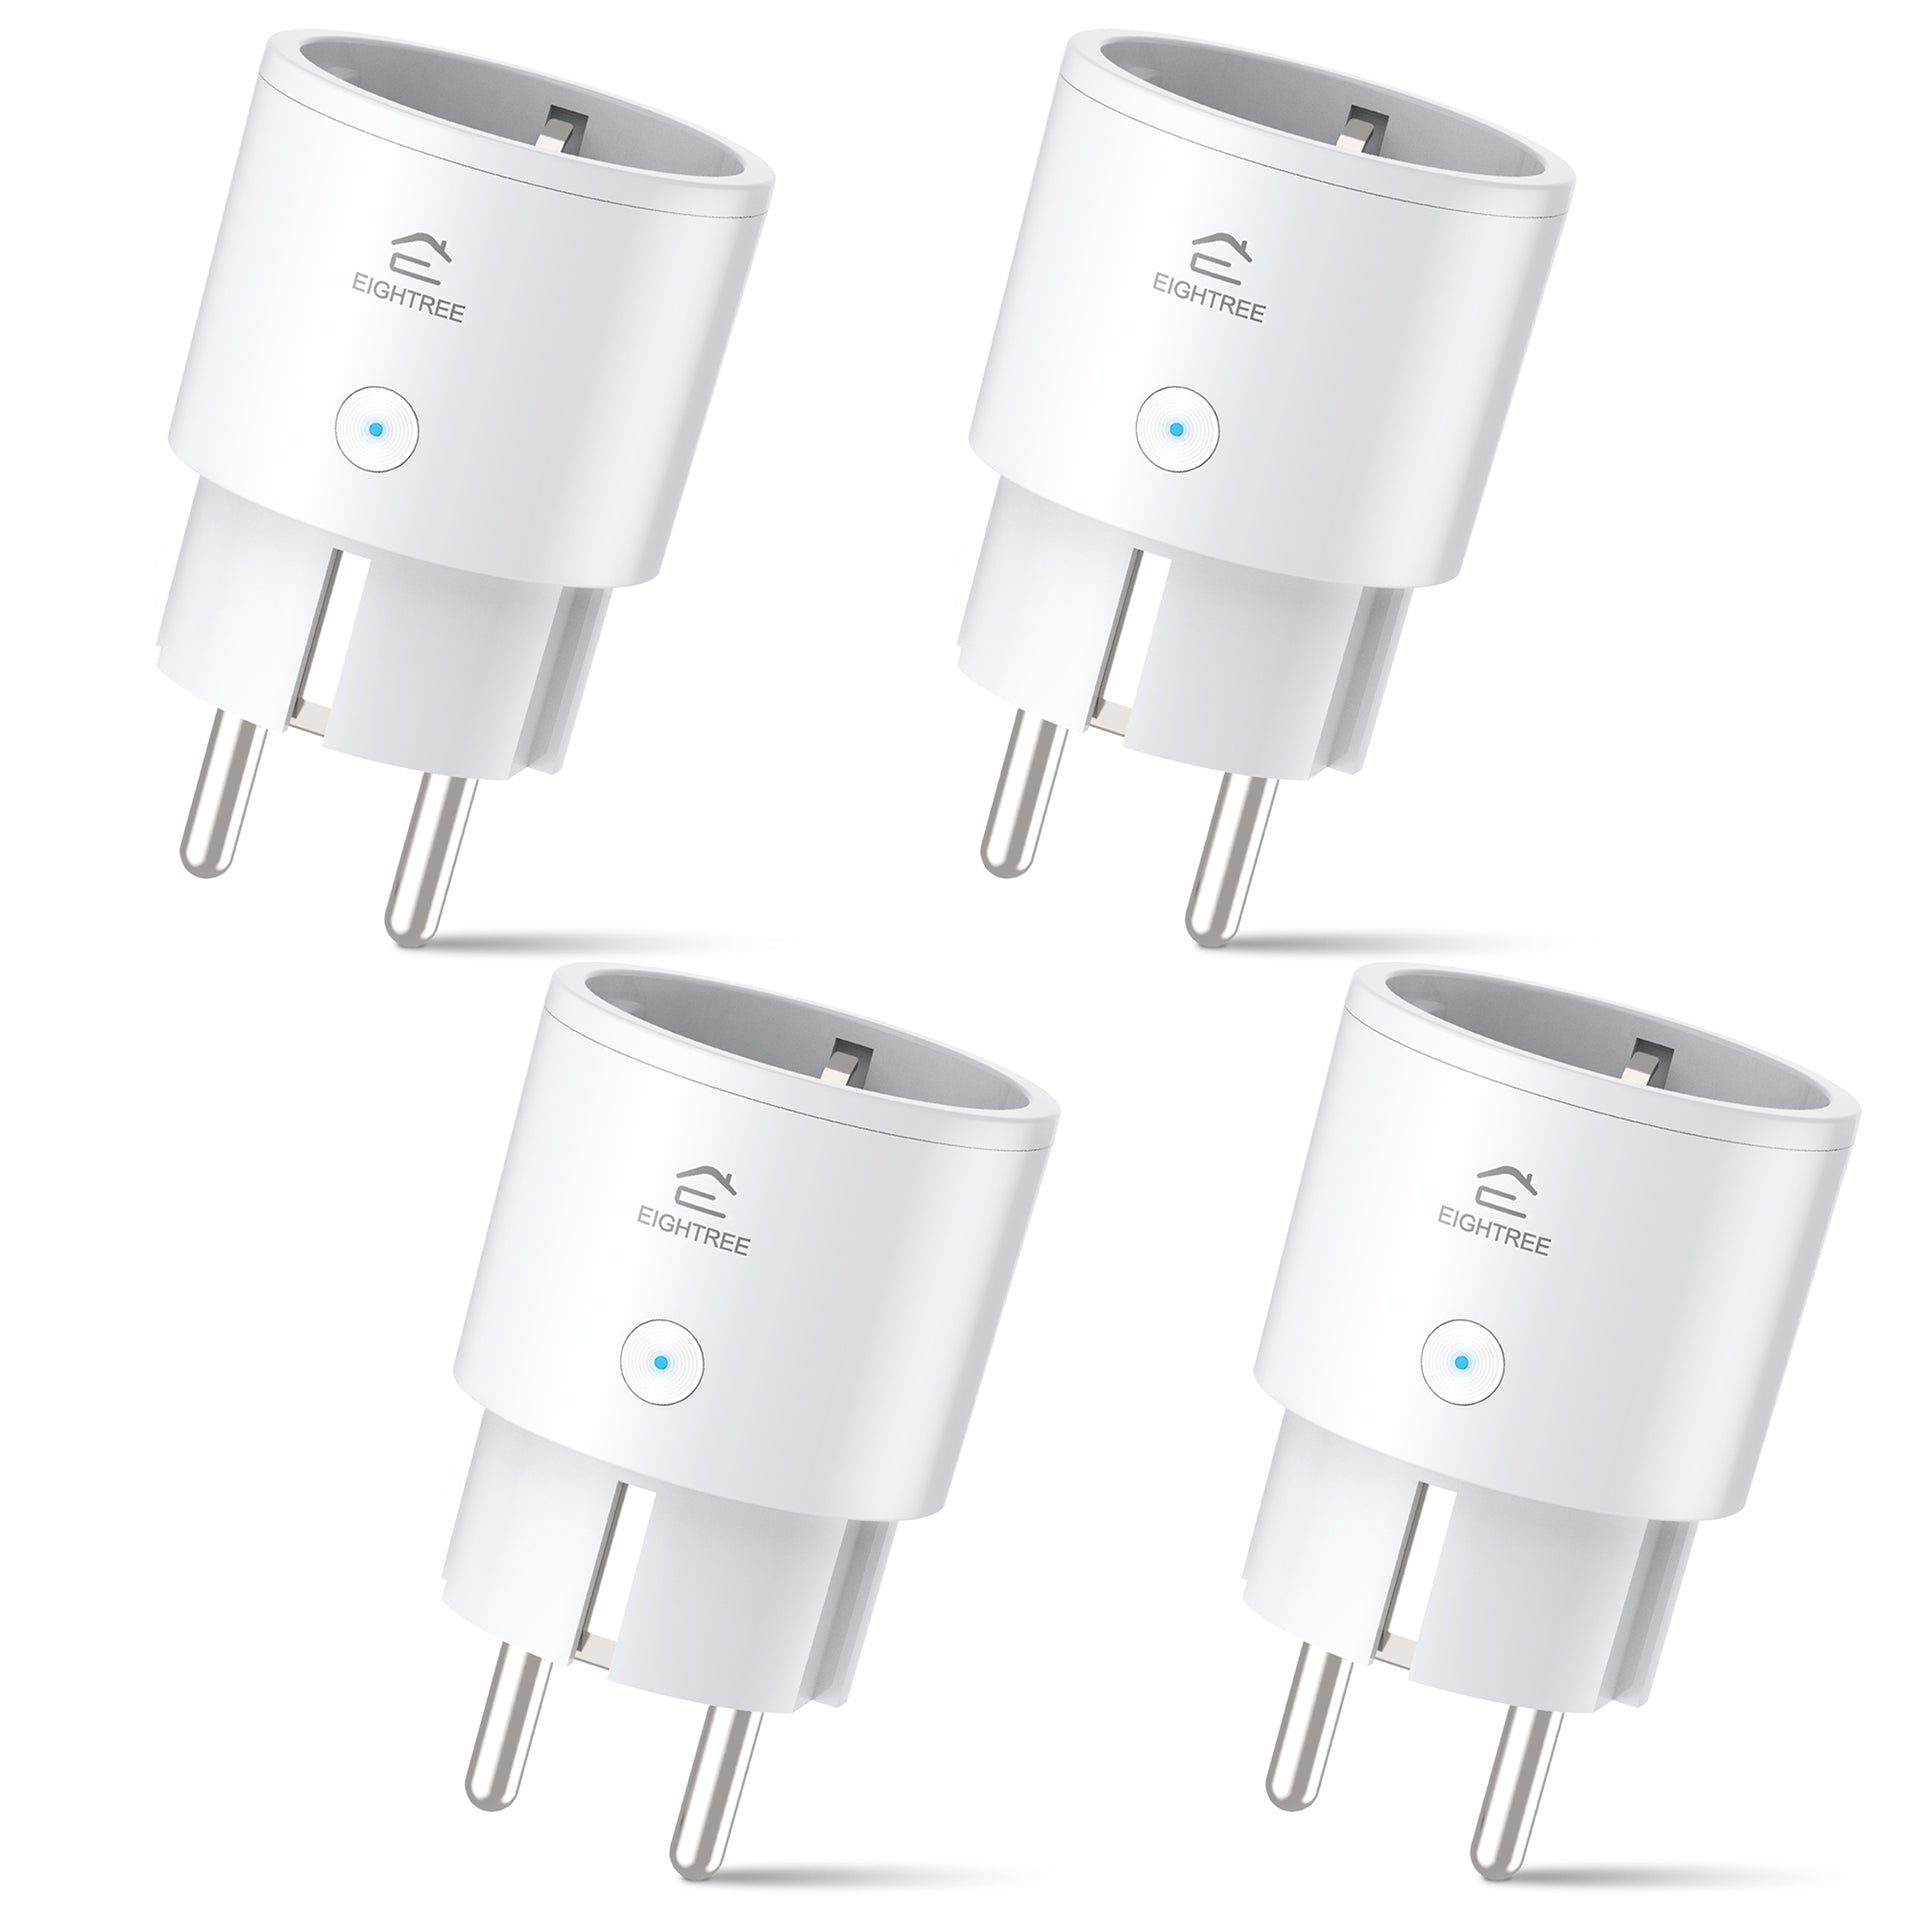 EIGHTREE ET22-2 Smart WiFi Socket Pack of 2 - Your Ultimate Smart